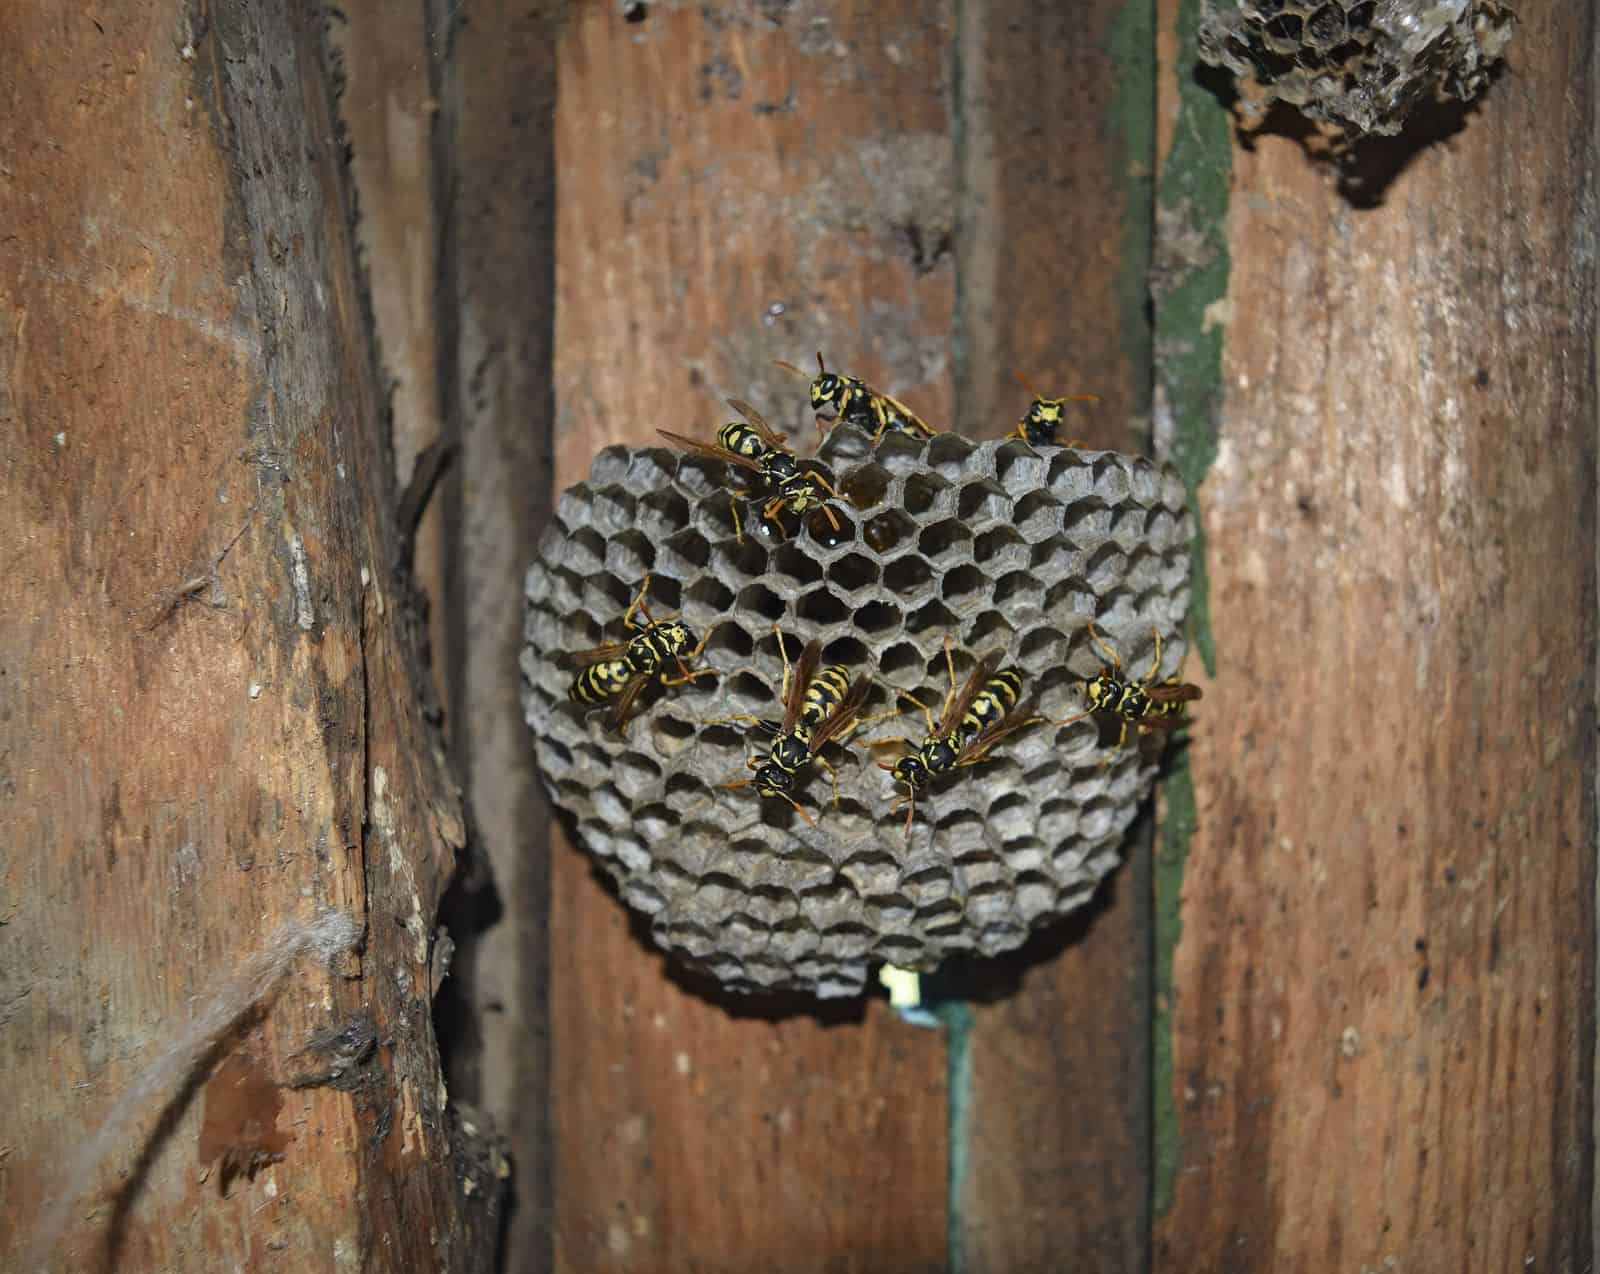 Methods for Removing Hornet or Wasp Nests1